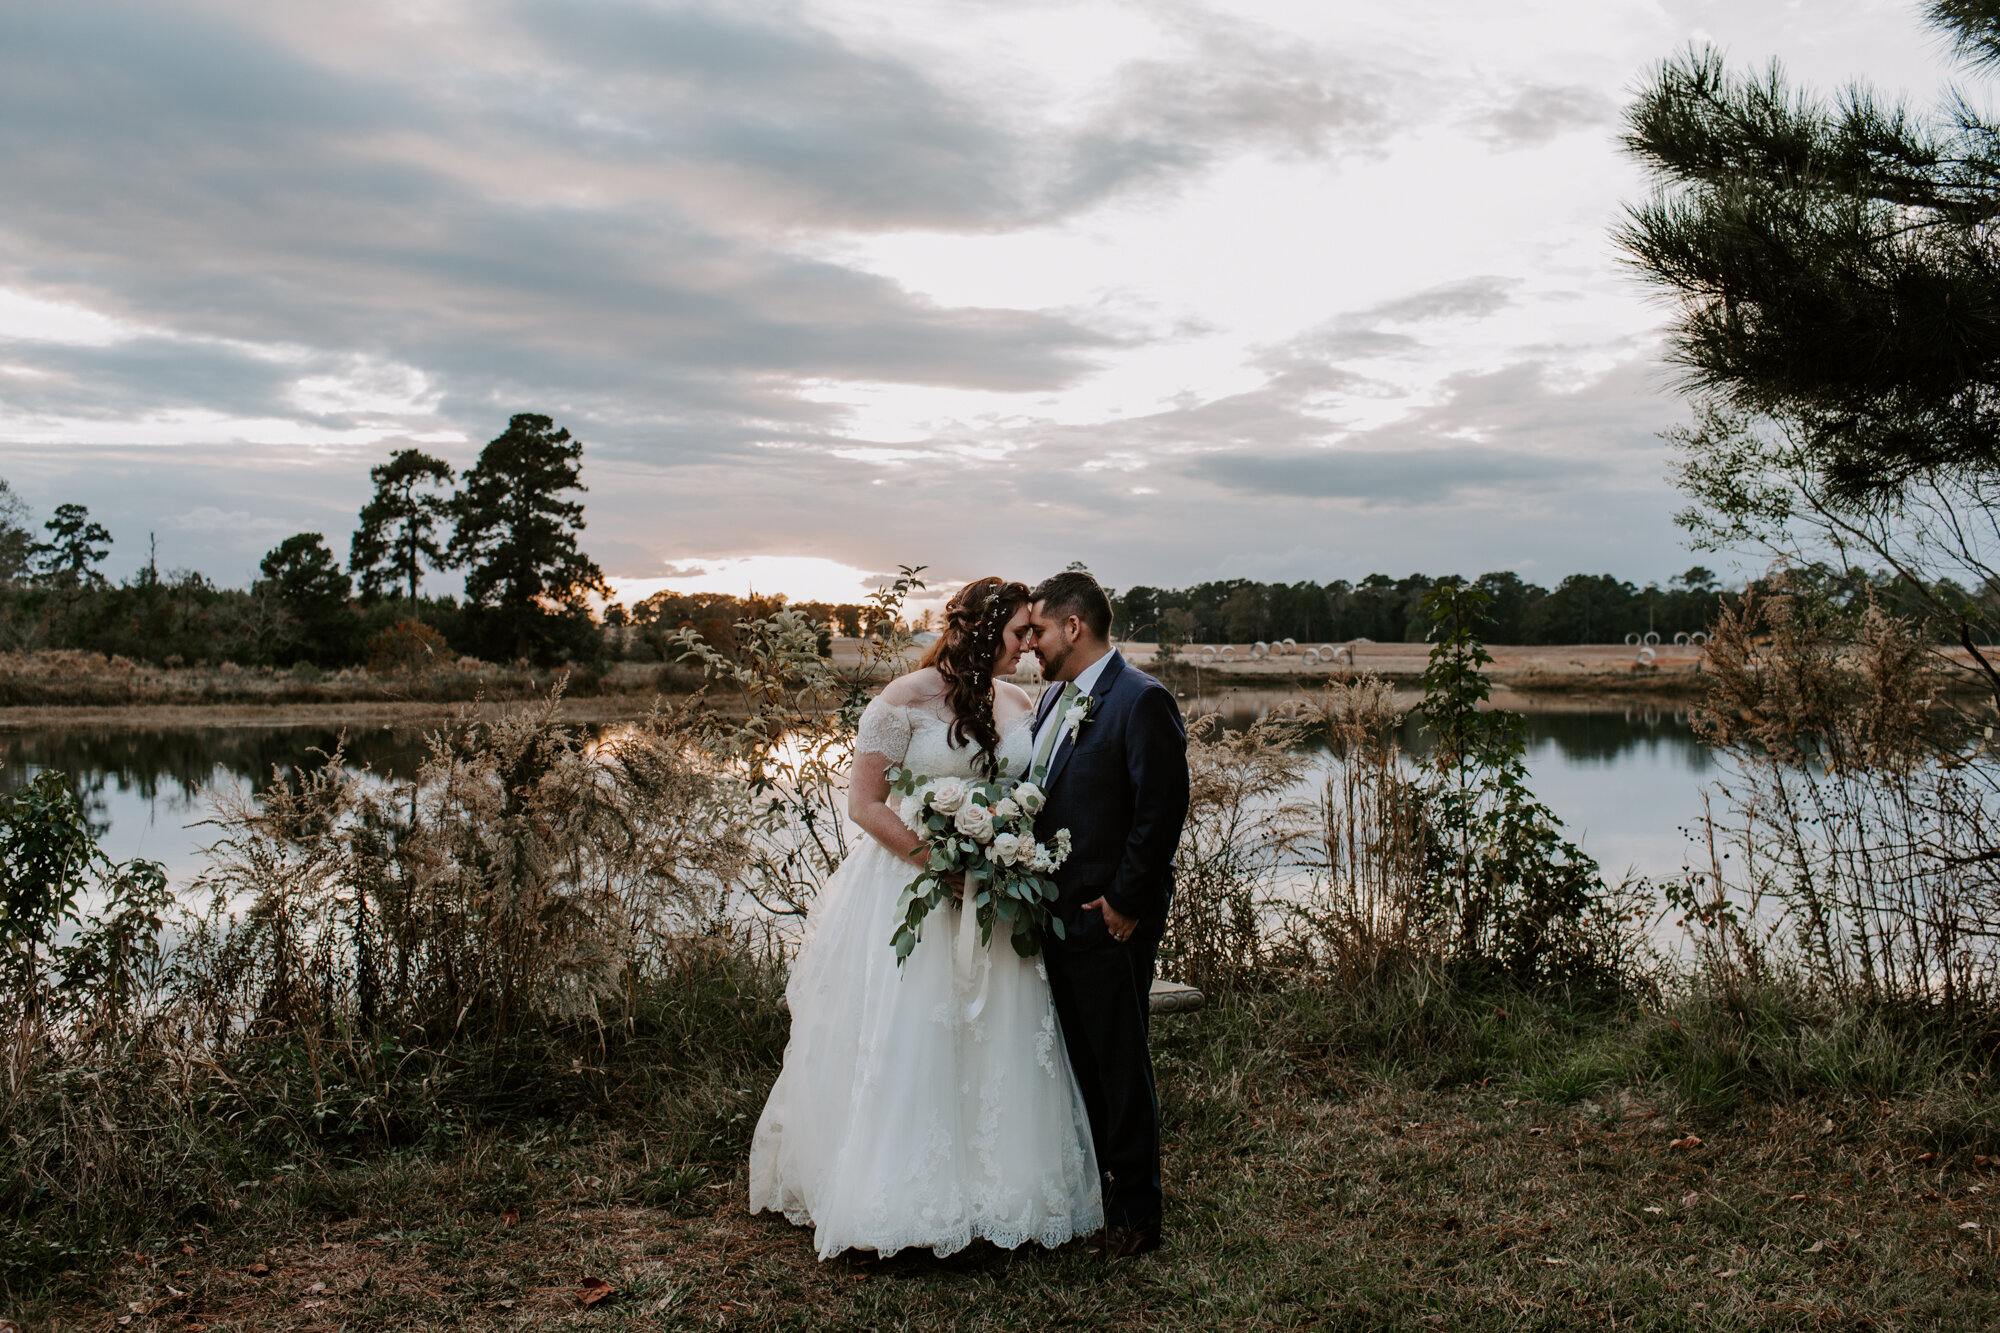 Bride and groom sunset portraits by the lake. Fairy Romantic Wedding at Magnolia Bells in Magnolia, TX